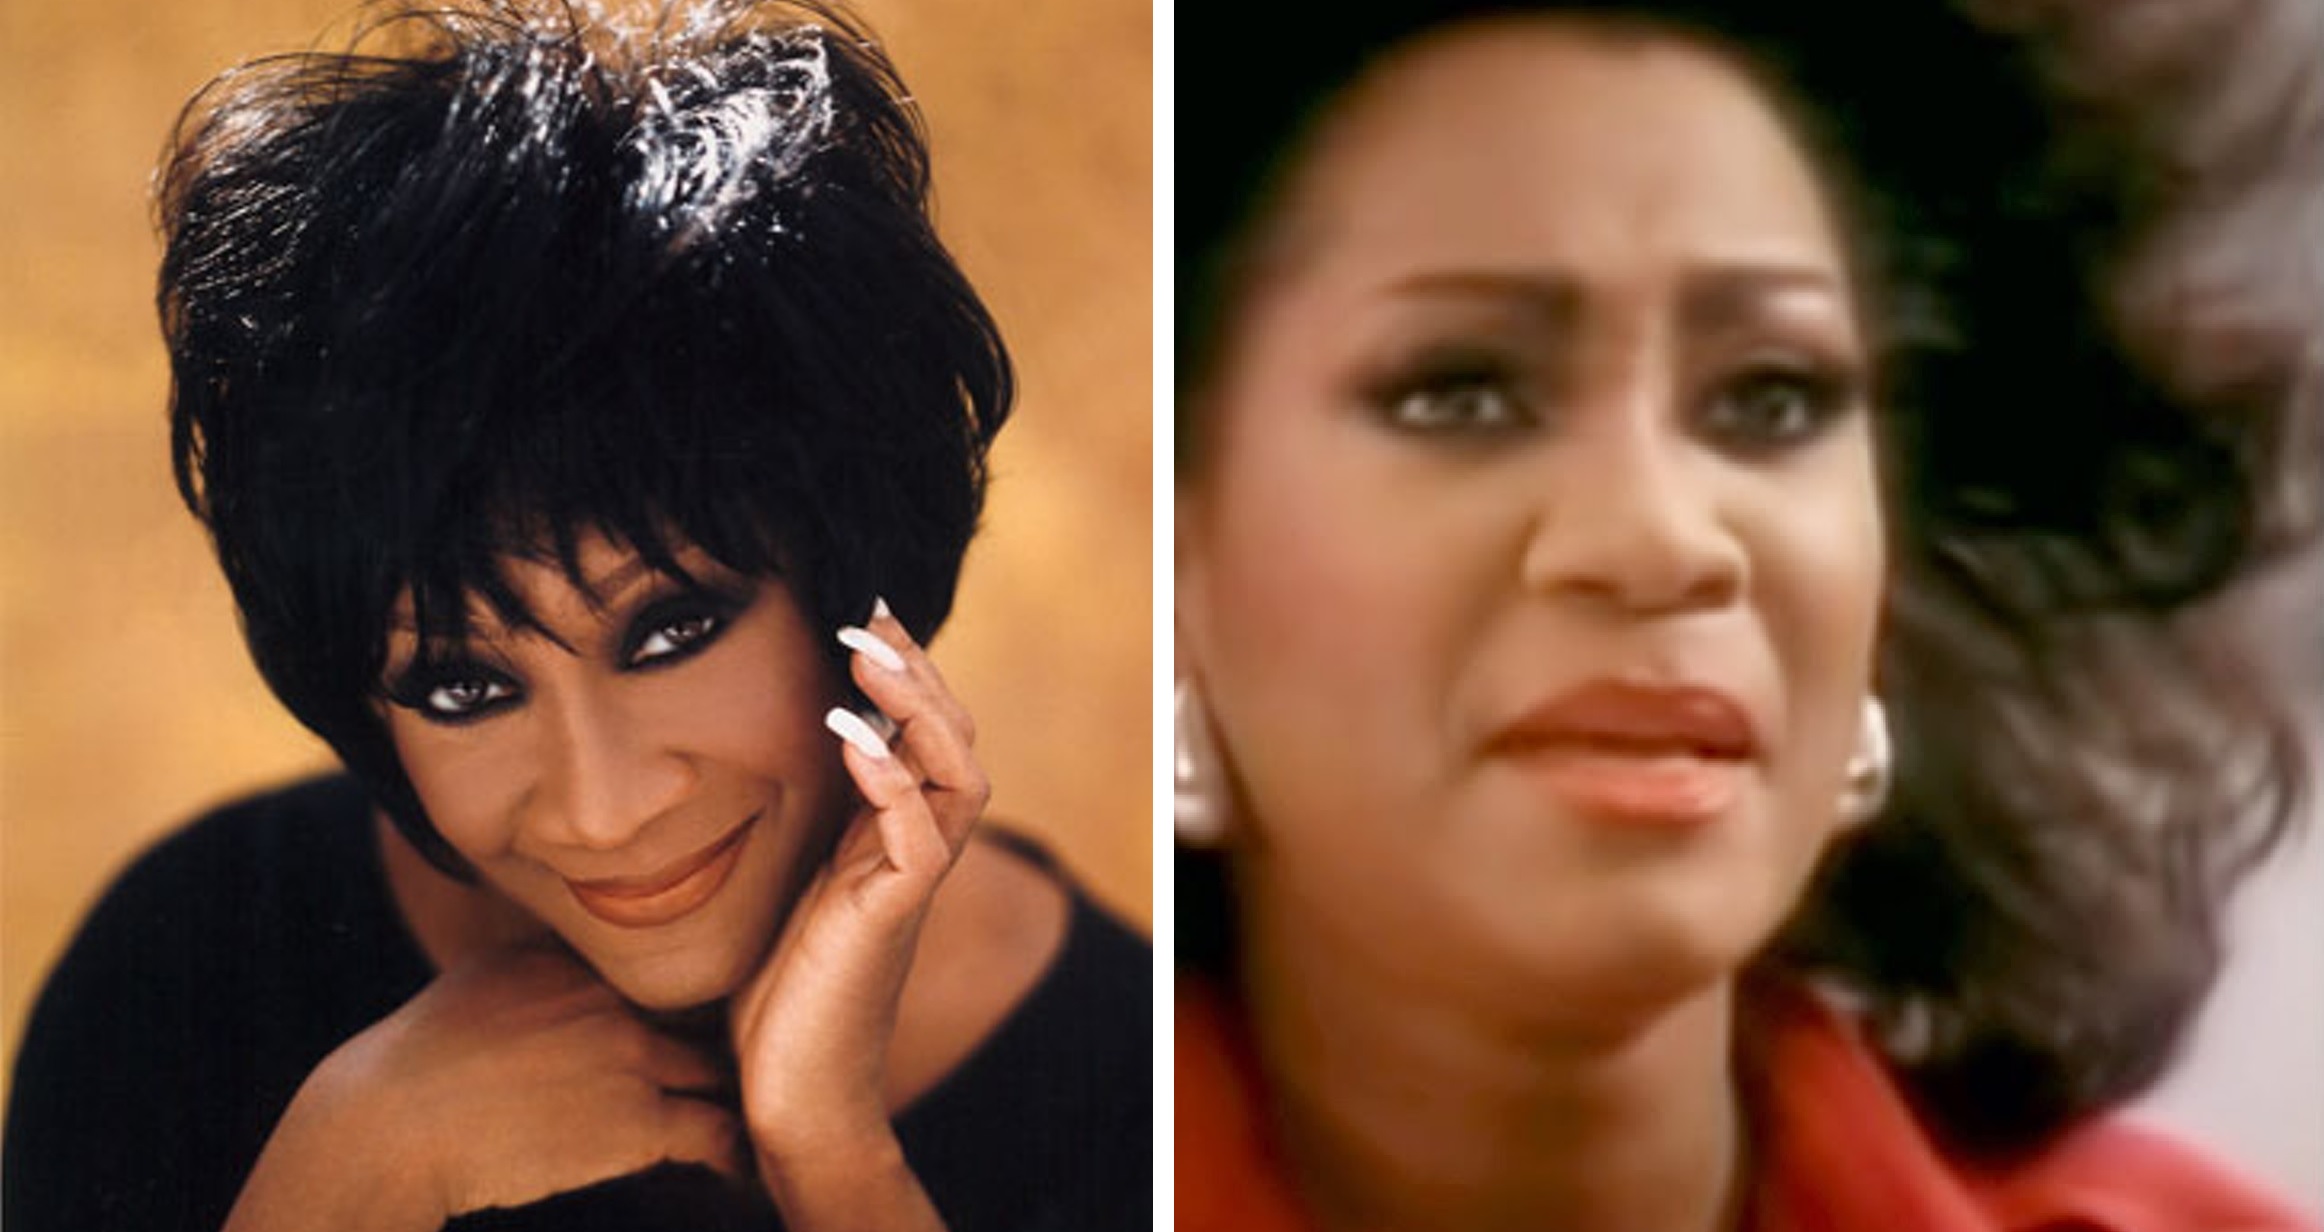 Throwback: Patti LaBelle’s Only #1 On Billboard Hot 100 As A Solo Artist – ‘On My Own’ Featuring Michael McDonald